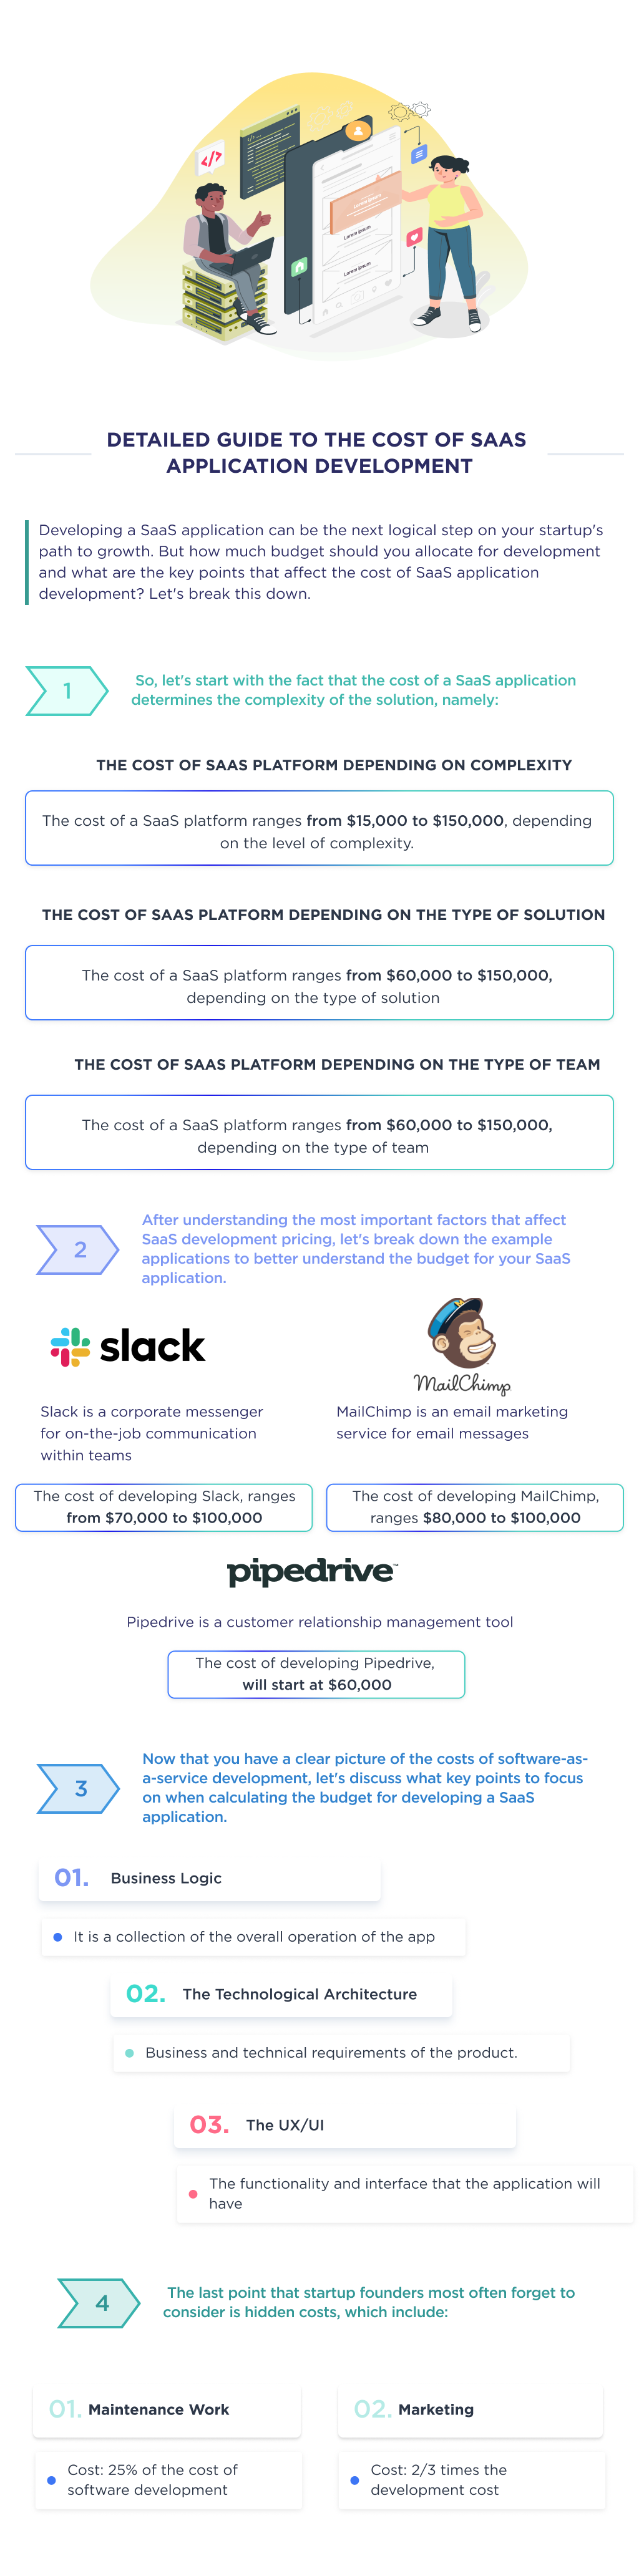 This infographic designed to cover all the major aspects and factors, that impact the cost of SaaS development.